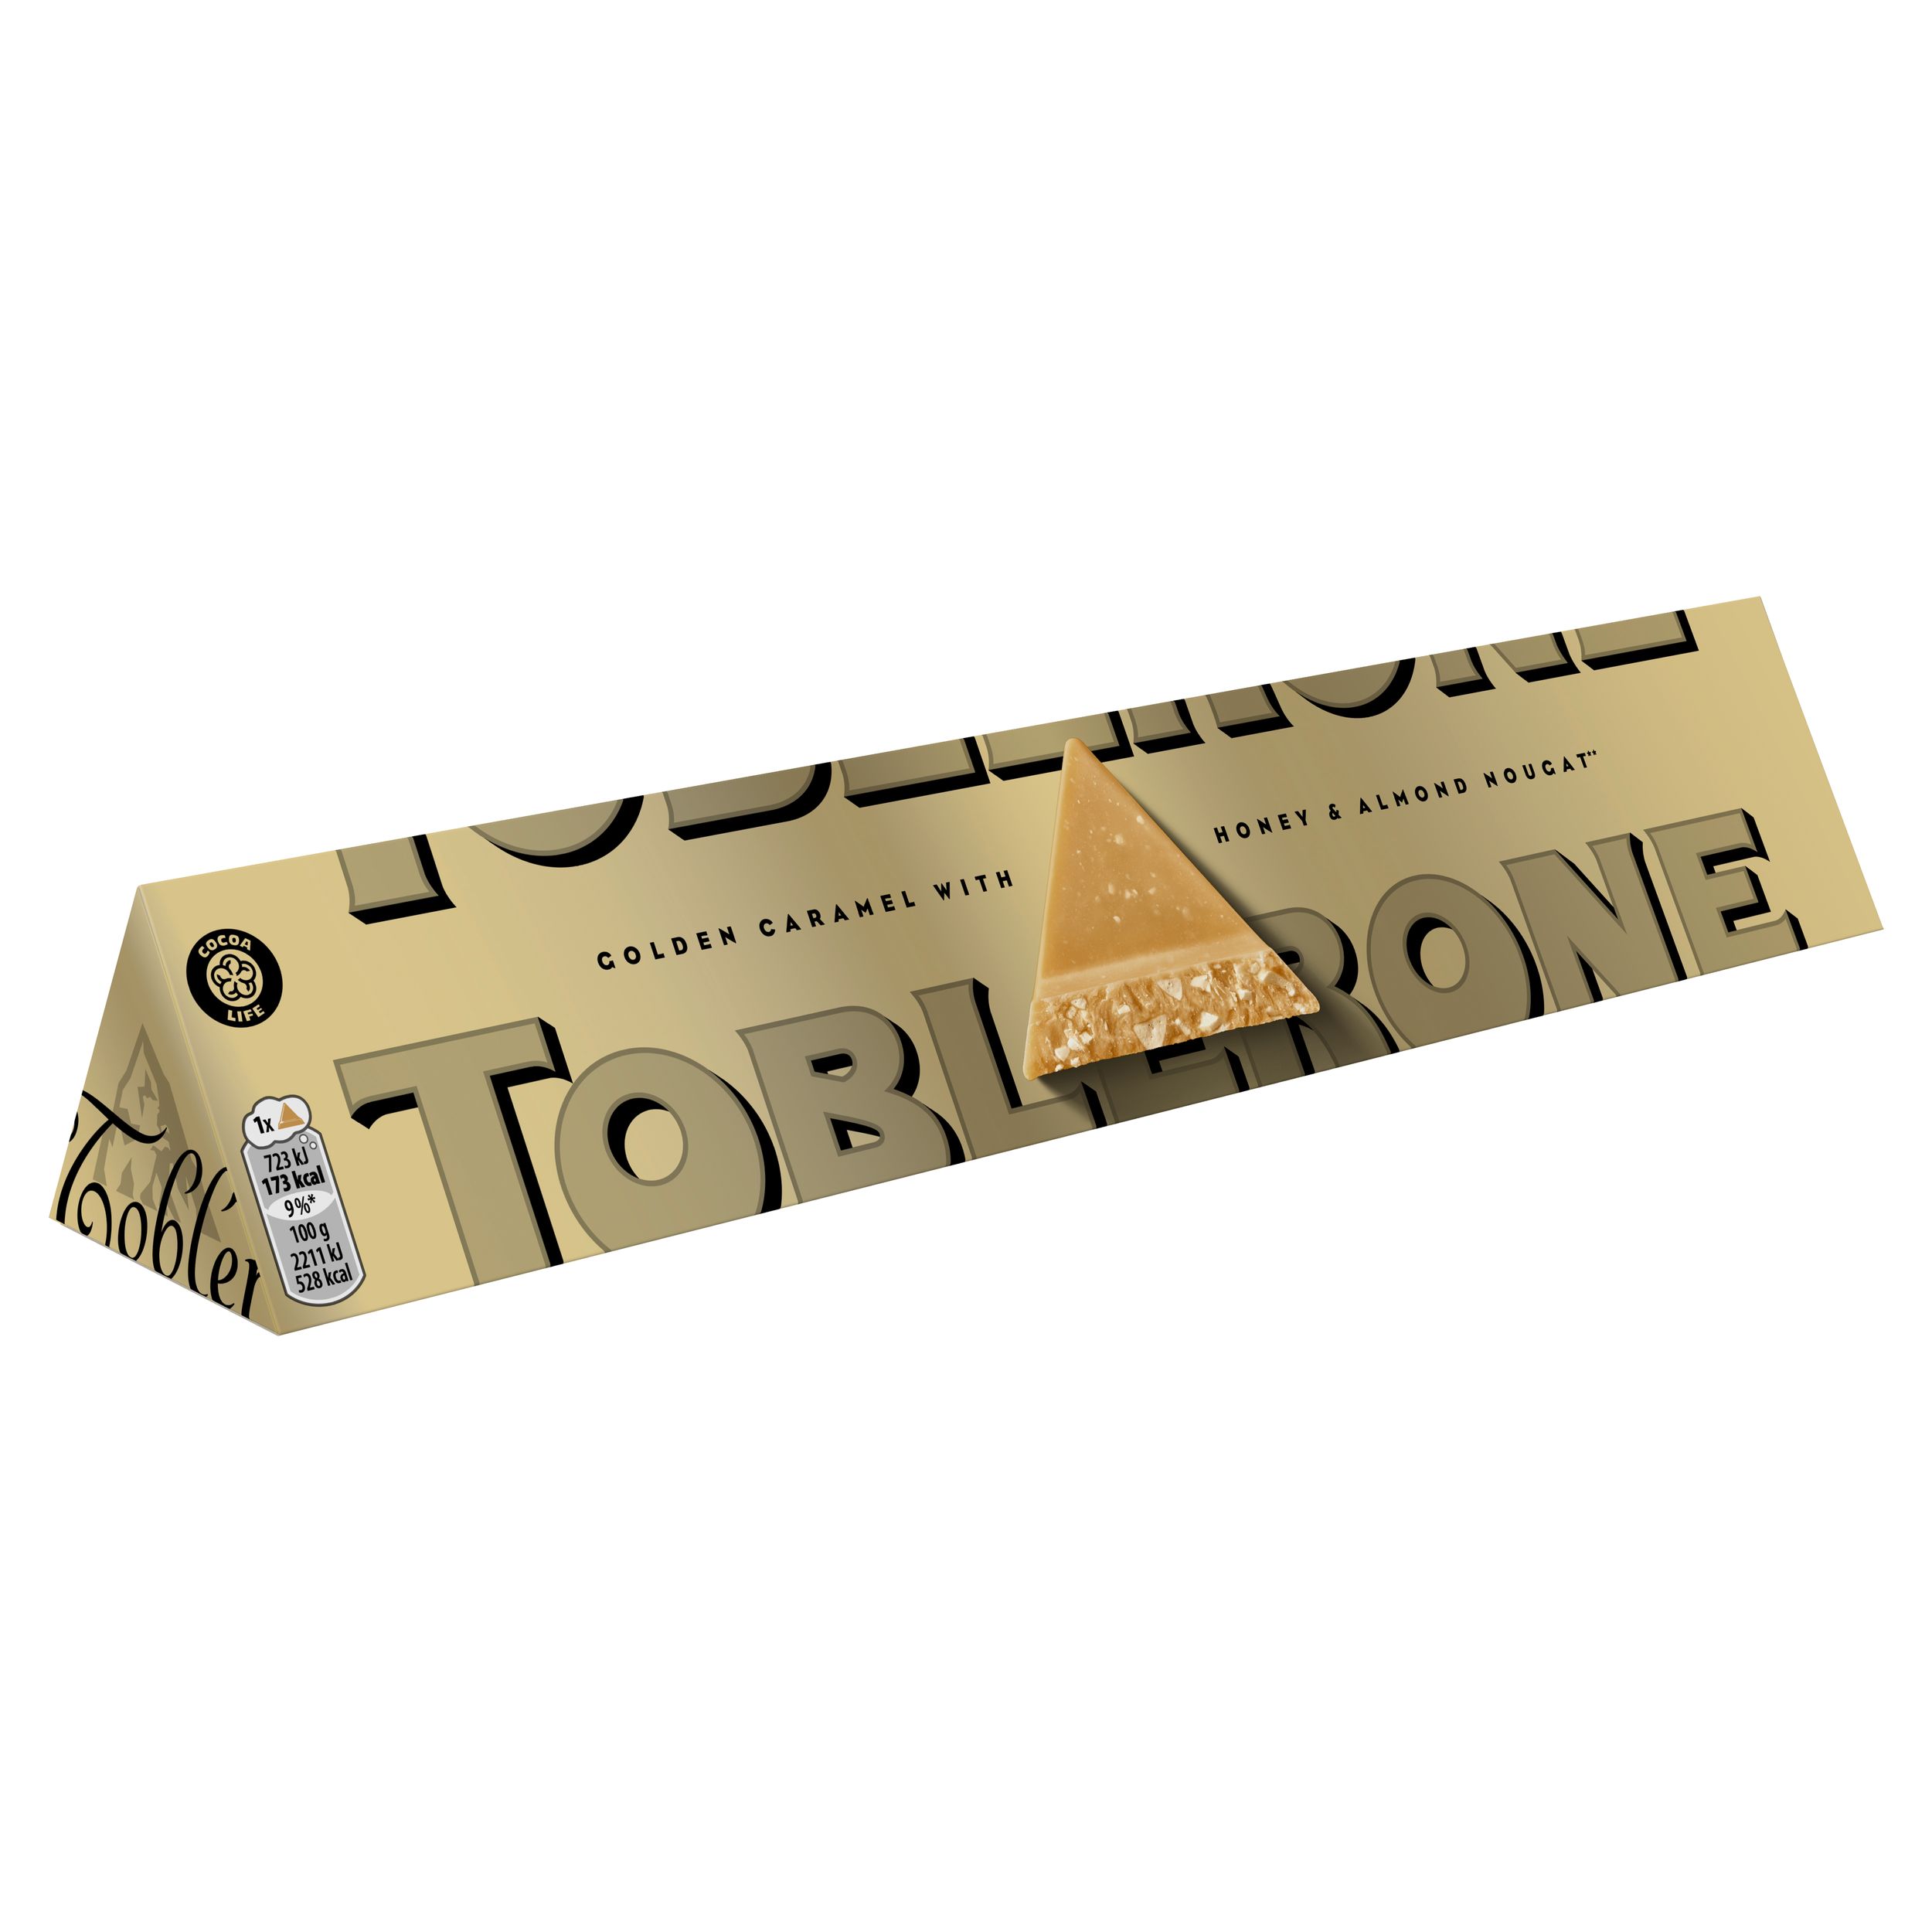 Toblerone launches ‘golden’ variant in limited edition